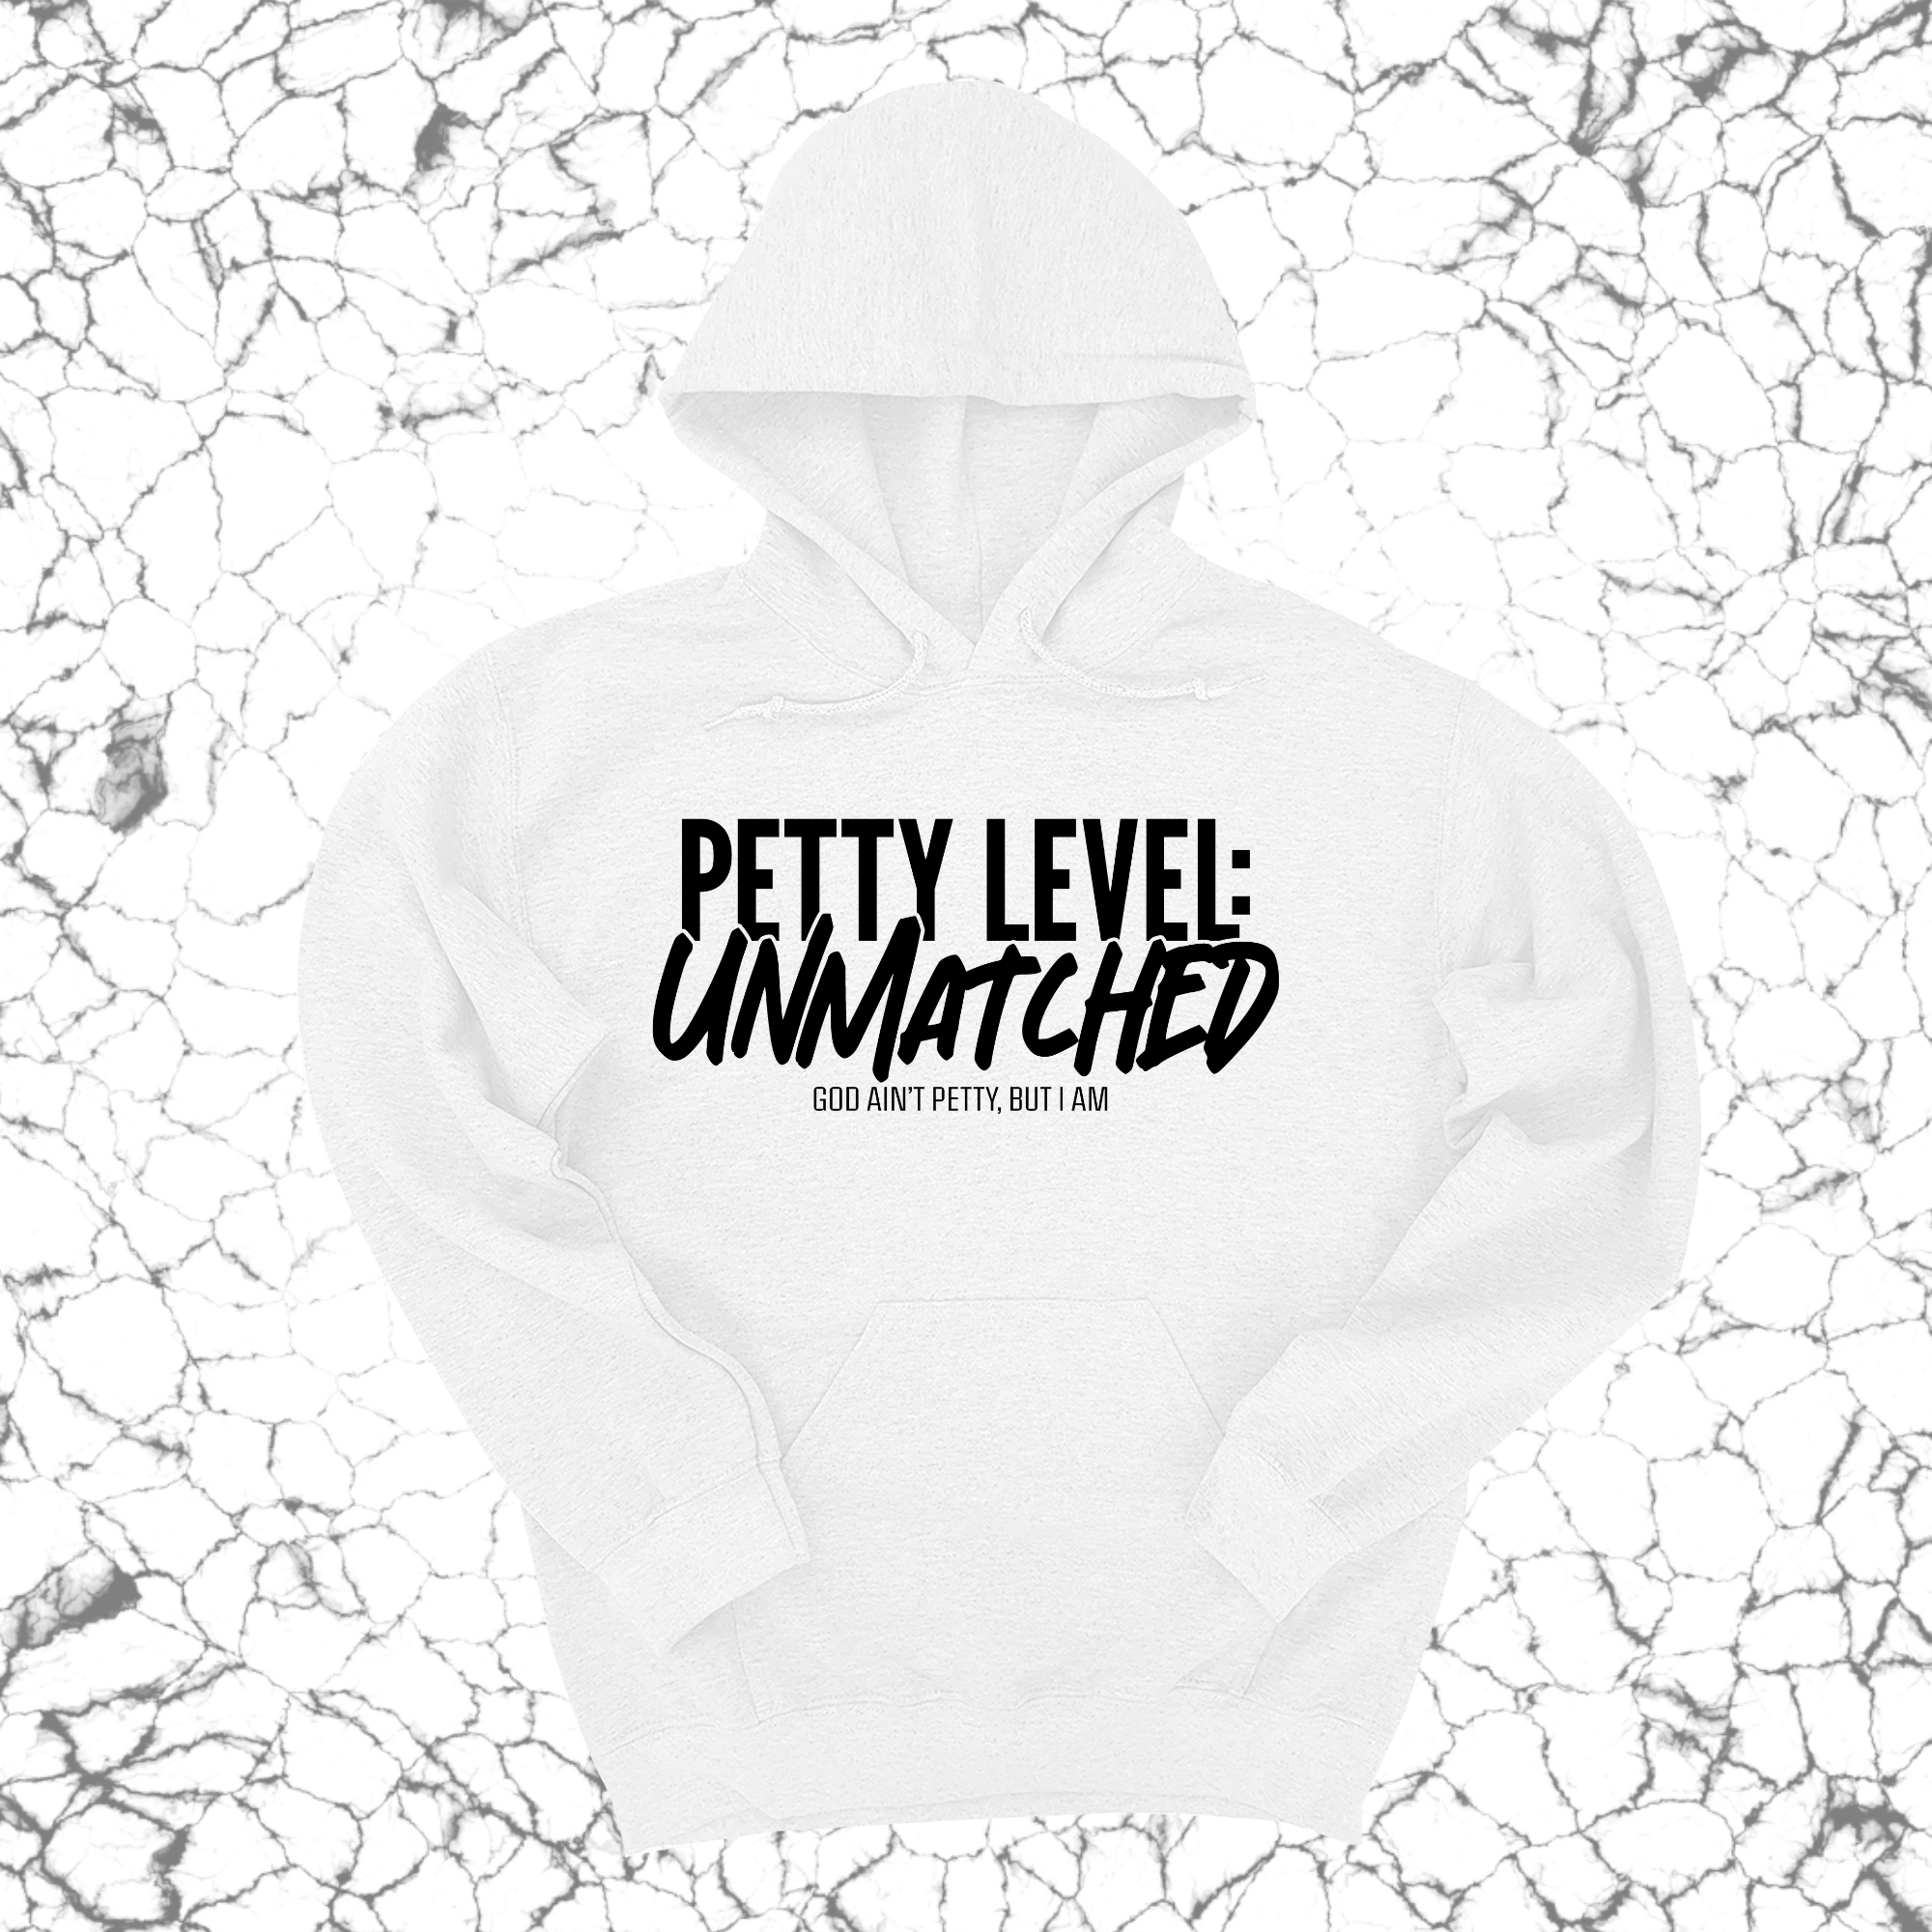 Petty Level: Unmatched Unisex Hoodie-Hoodie-The Original God Ain't Petty But I Am